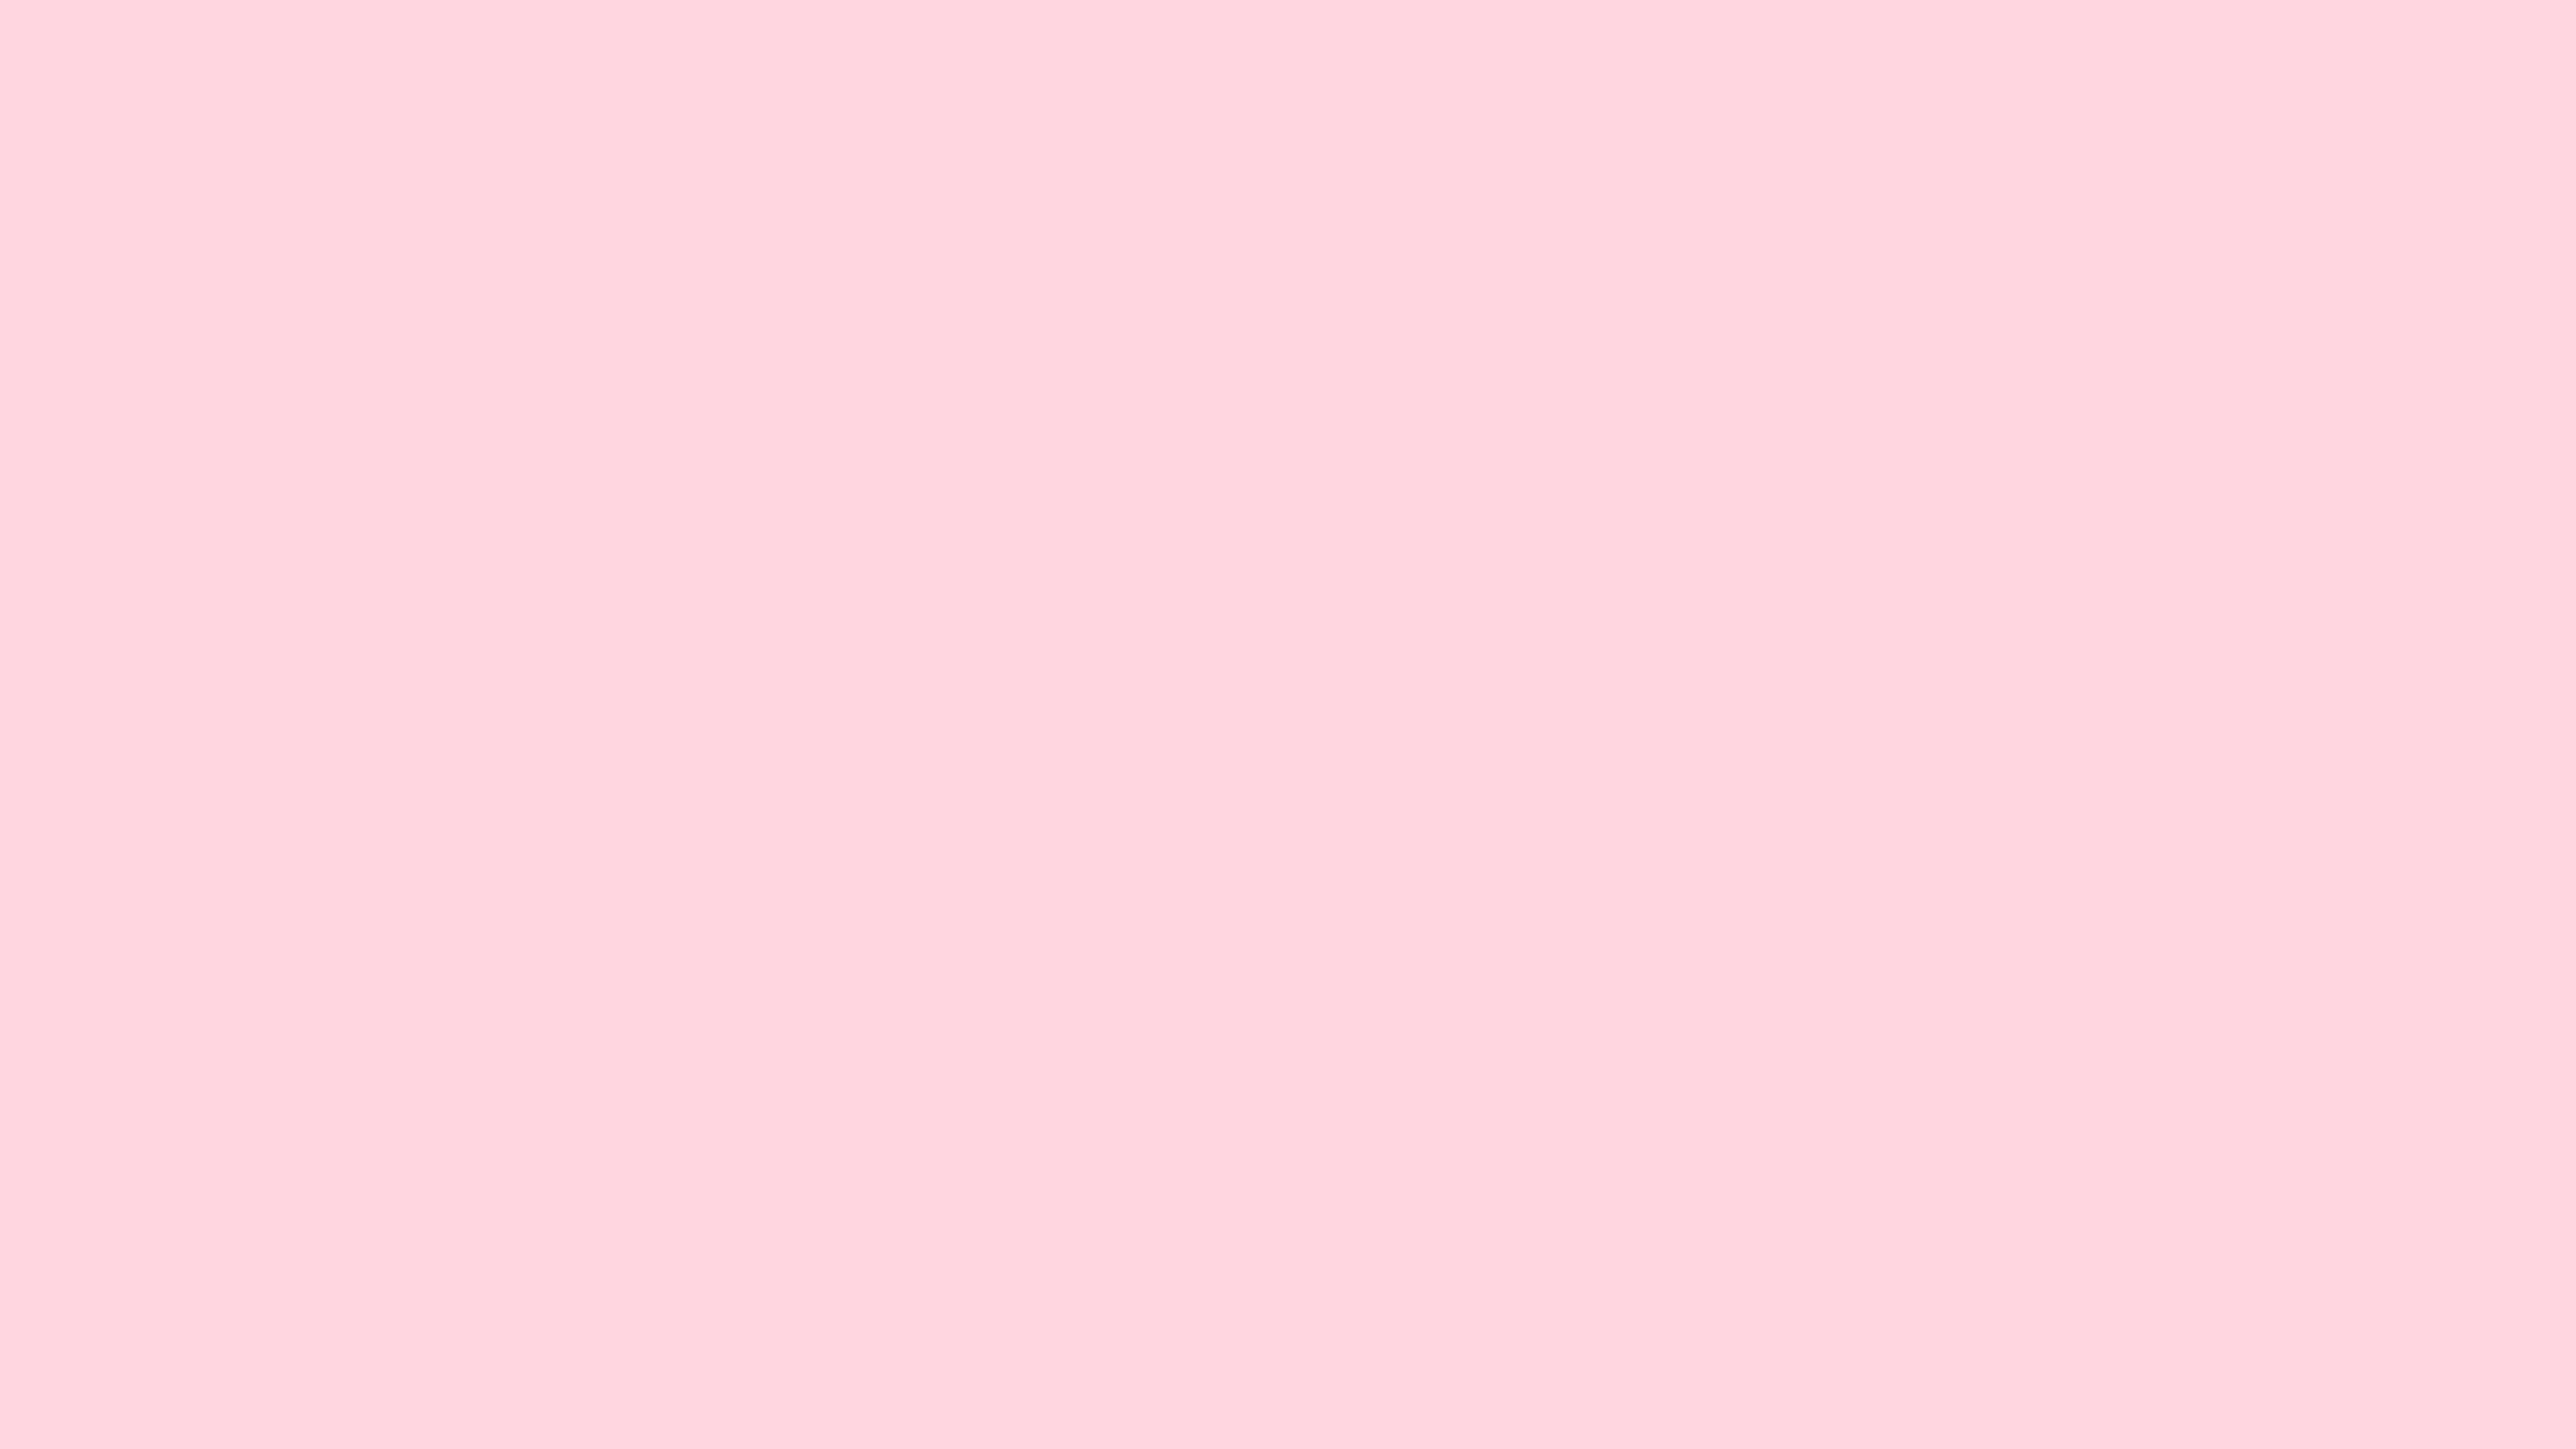 No Need To Blush Solid Color Background Image | Free Image Generator